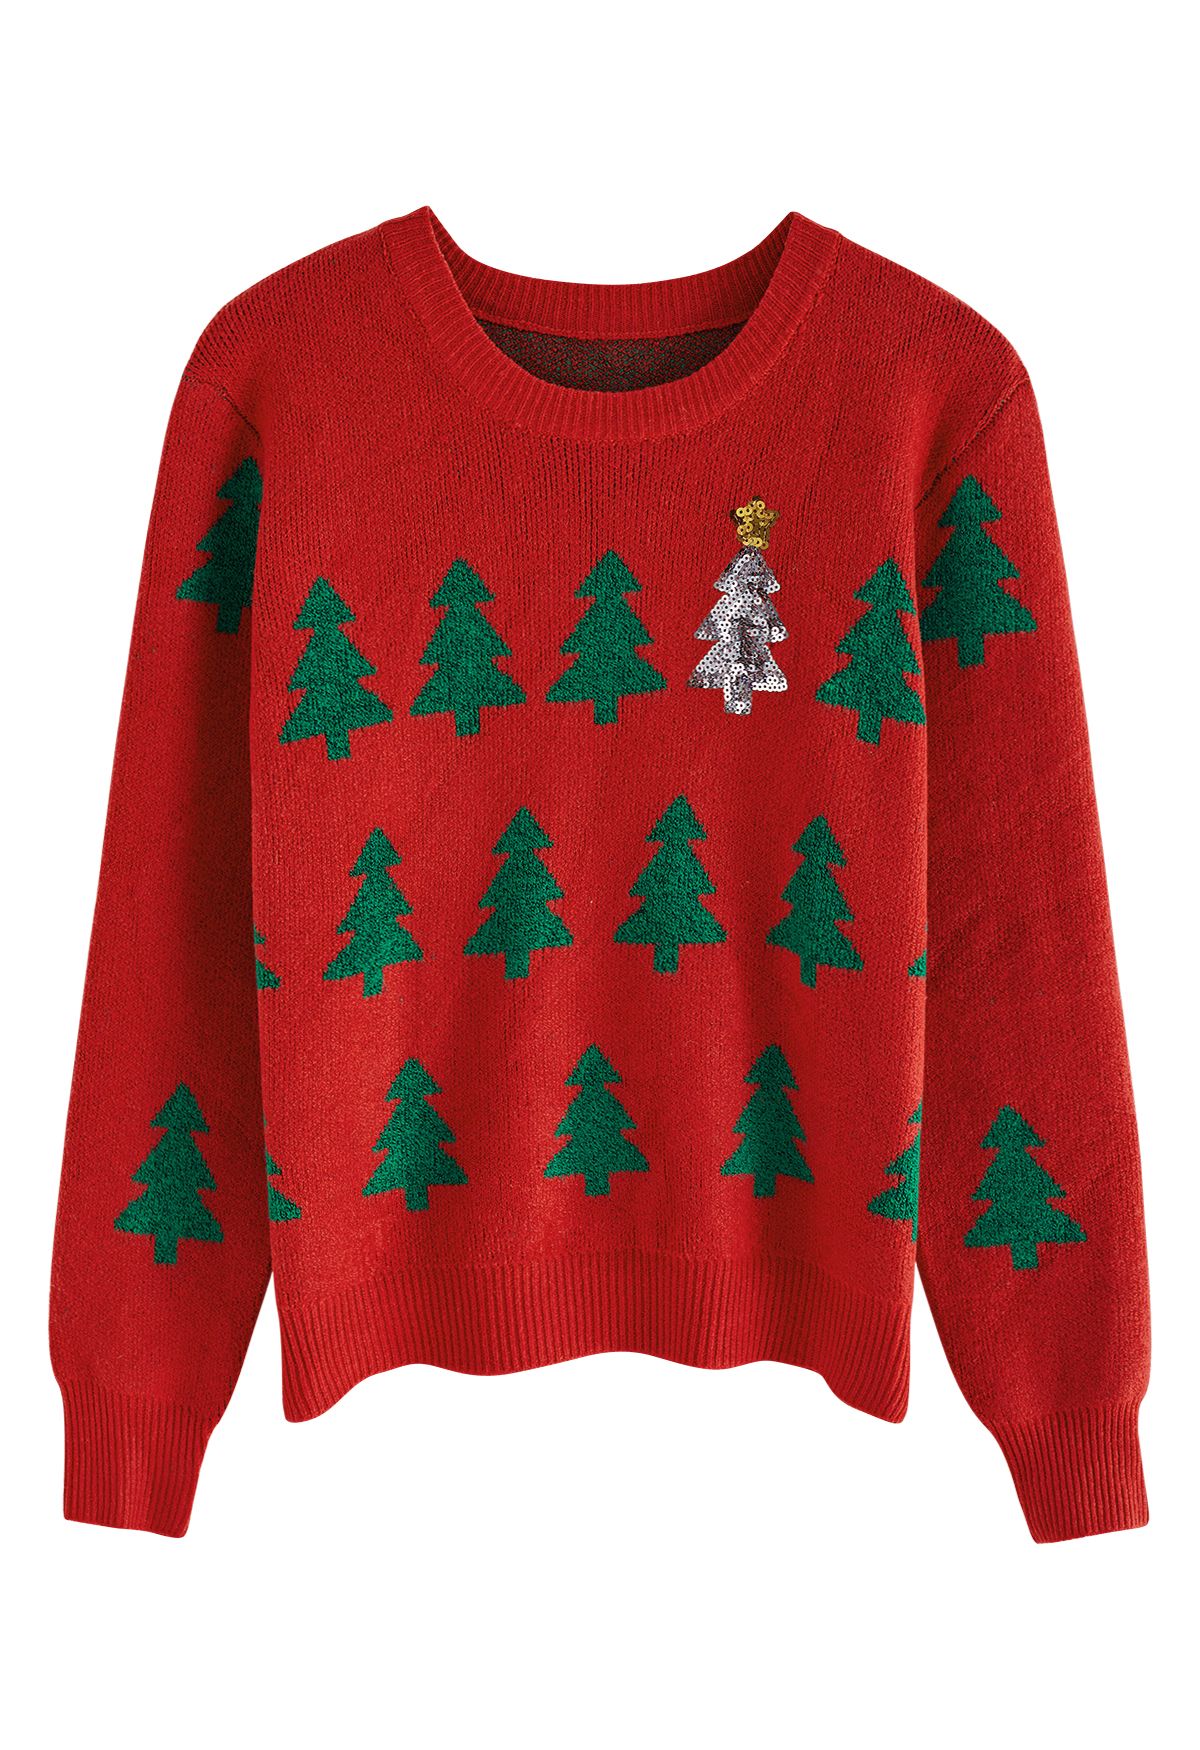 Sequined Christmas Tree Knit Sweater in Red